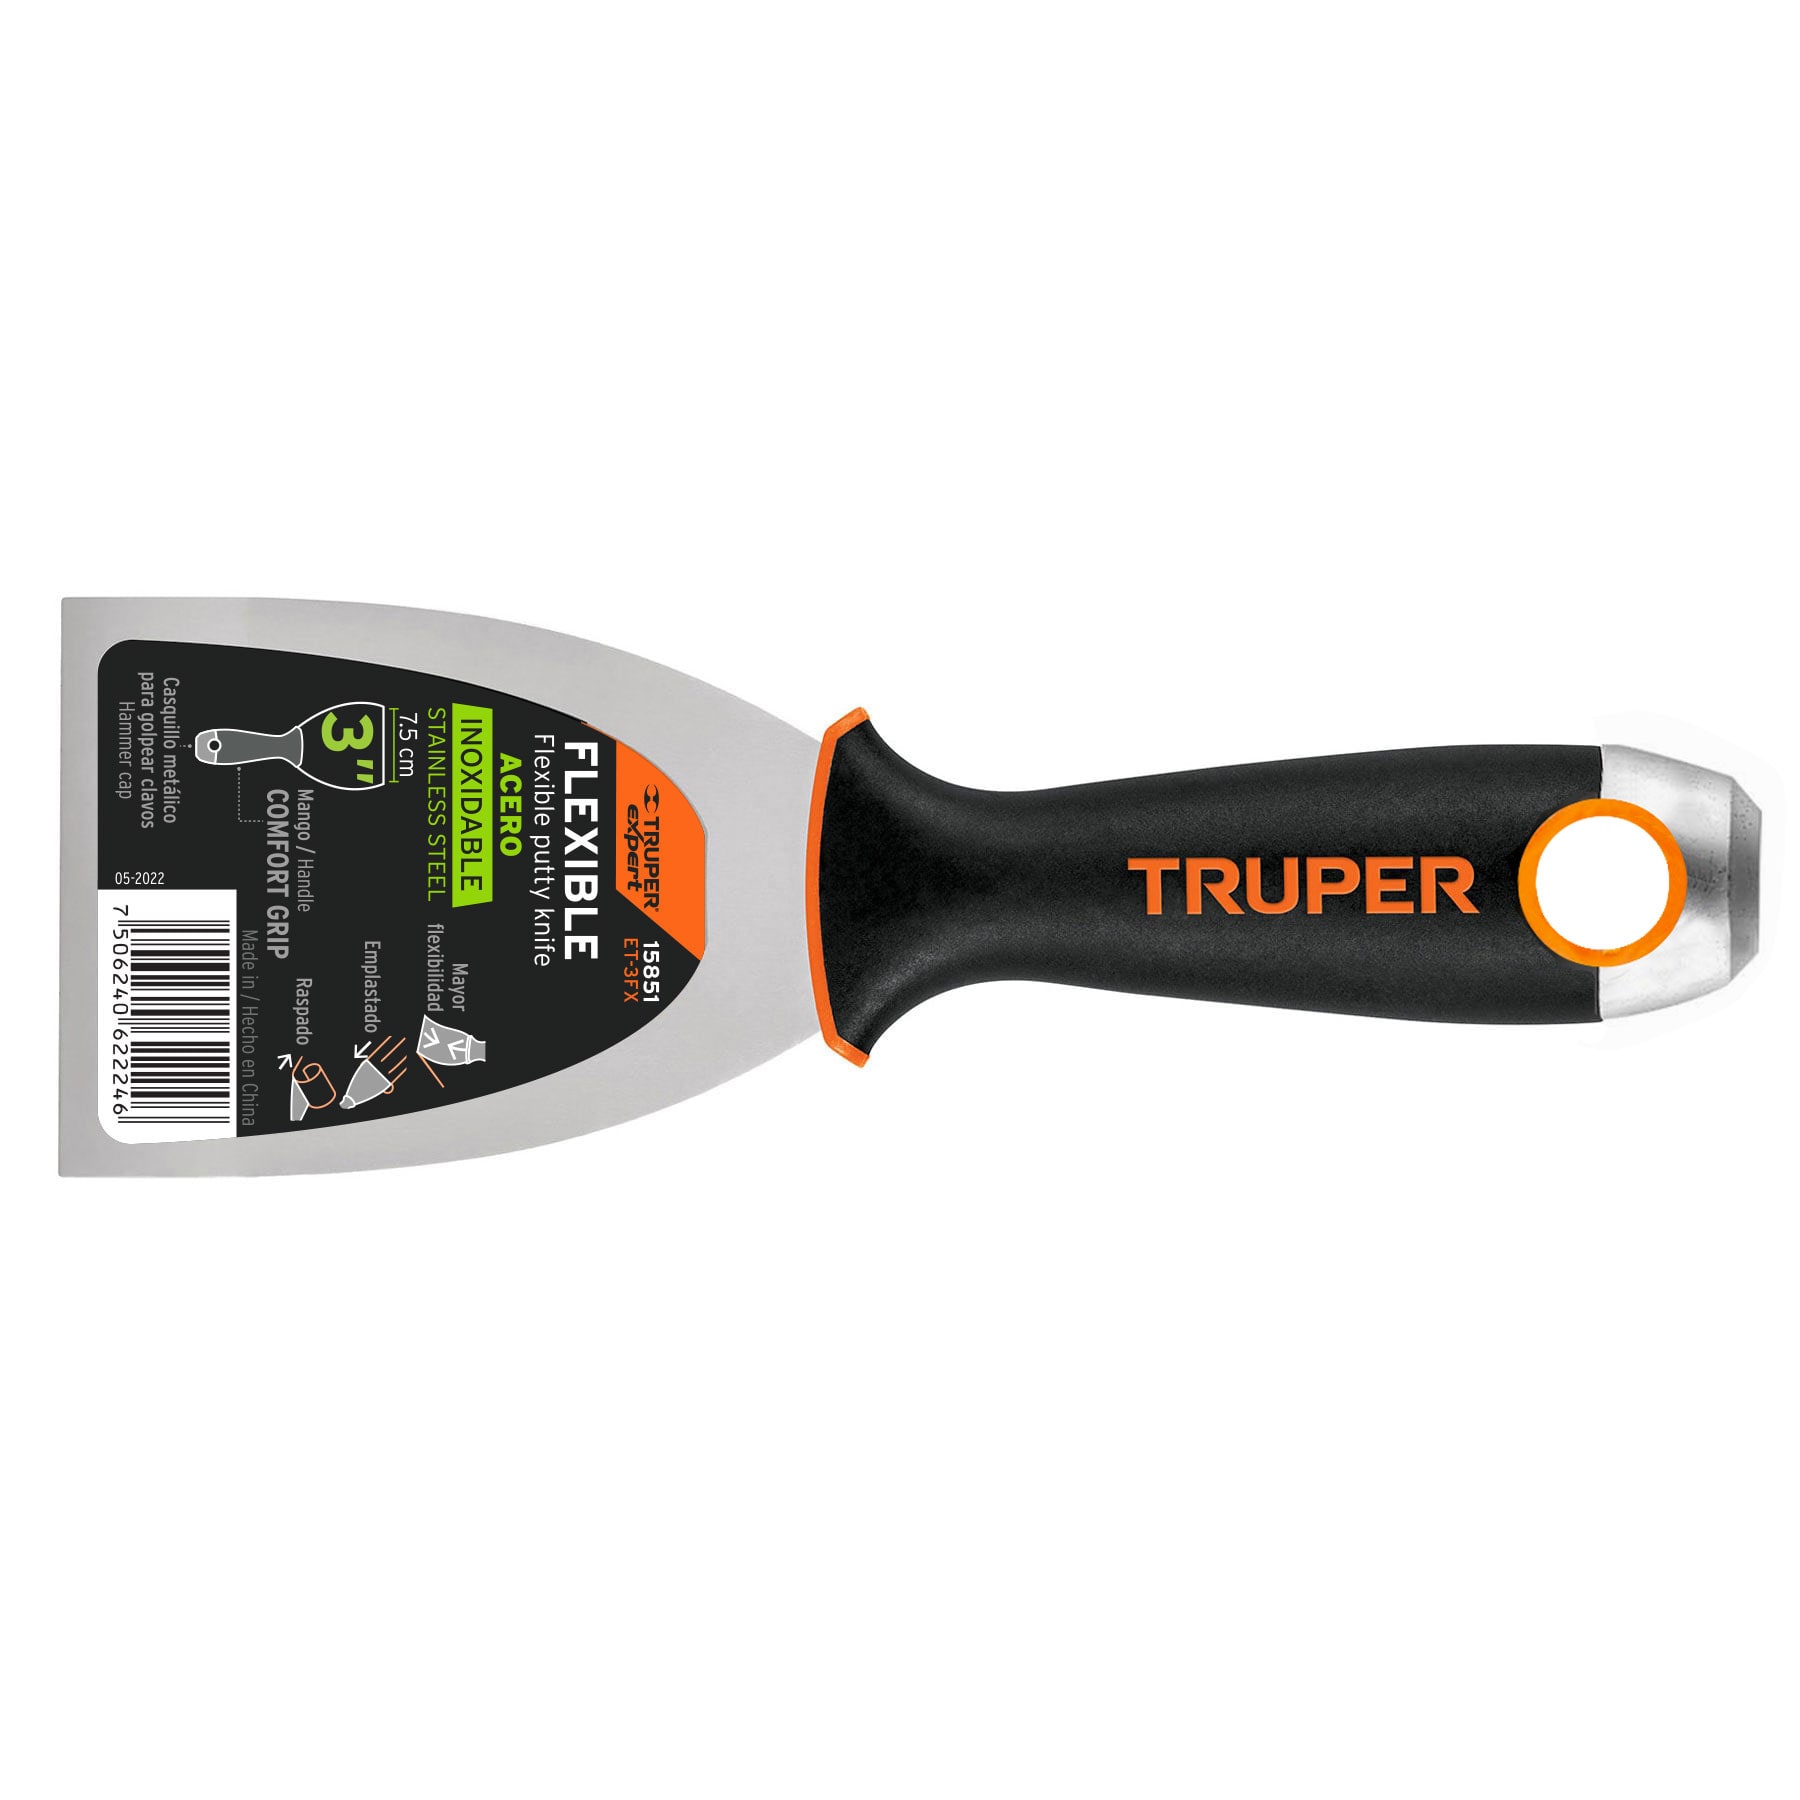 Truper Stainless Steel Flexible Putty Knives